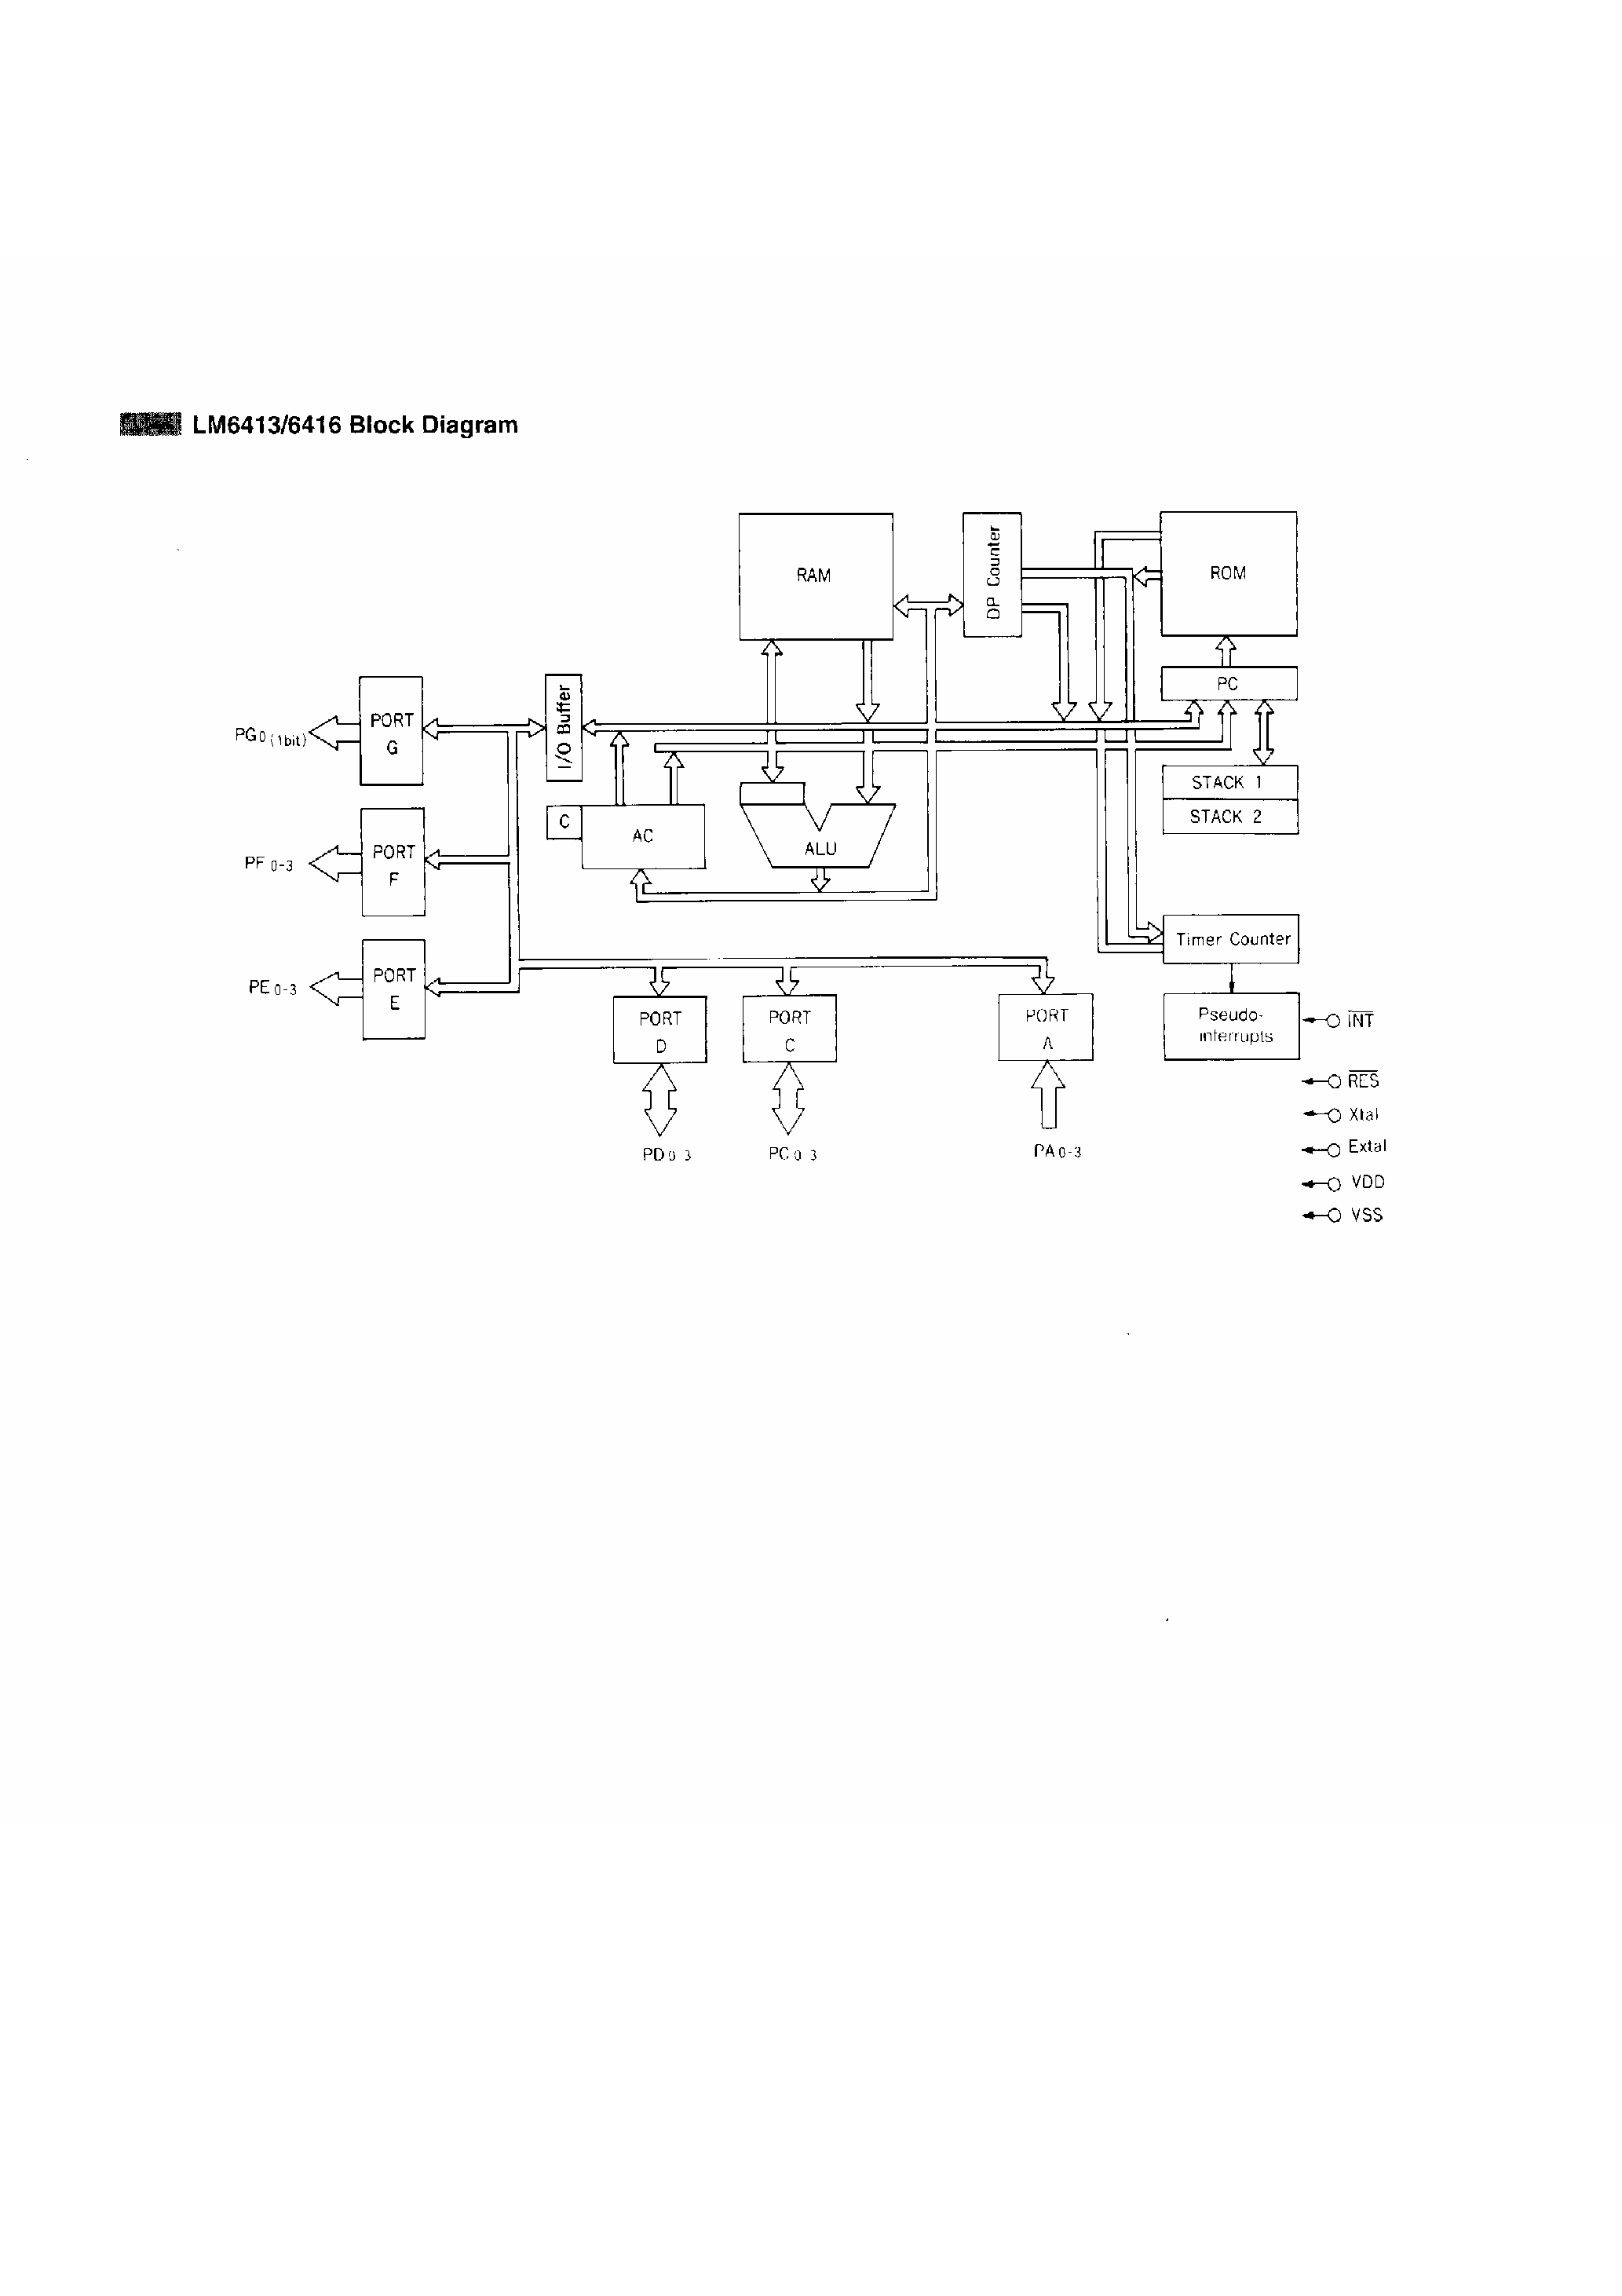 Datasheet LM6413 - (LM6413 / LM6416 / LM6417) NMOS 4-Bit Single-Chip Microcomputers page 2